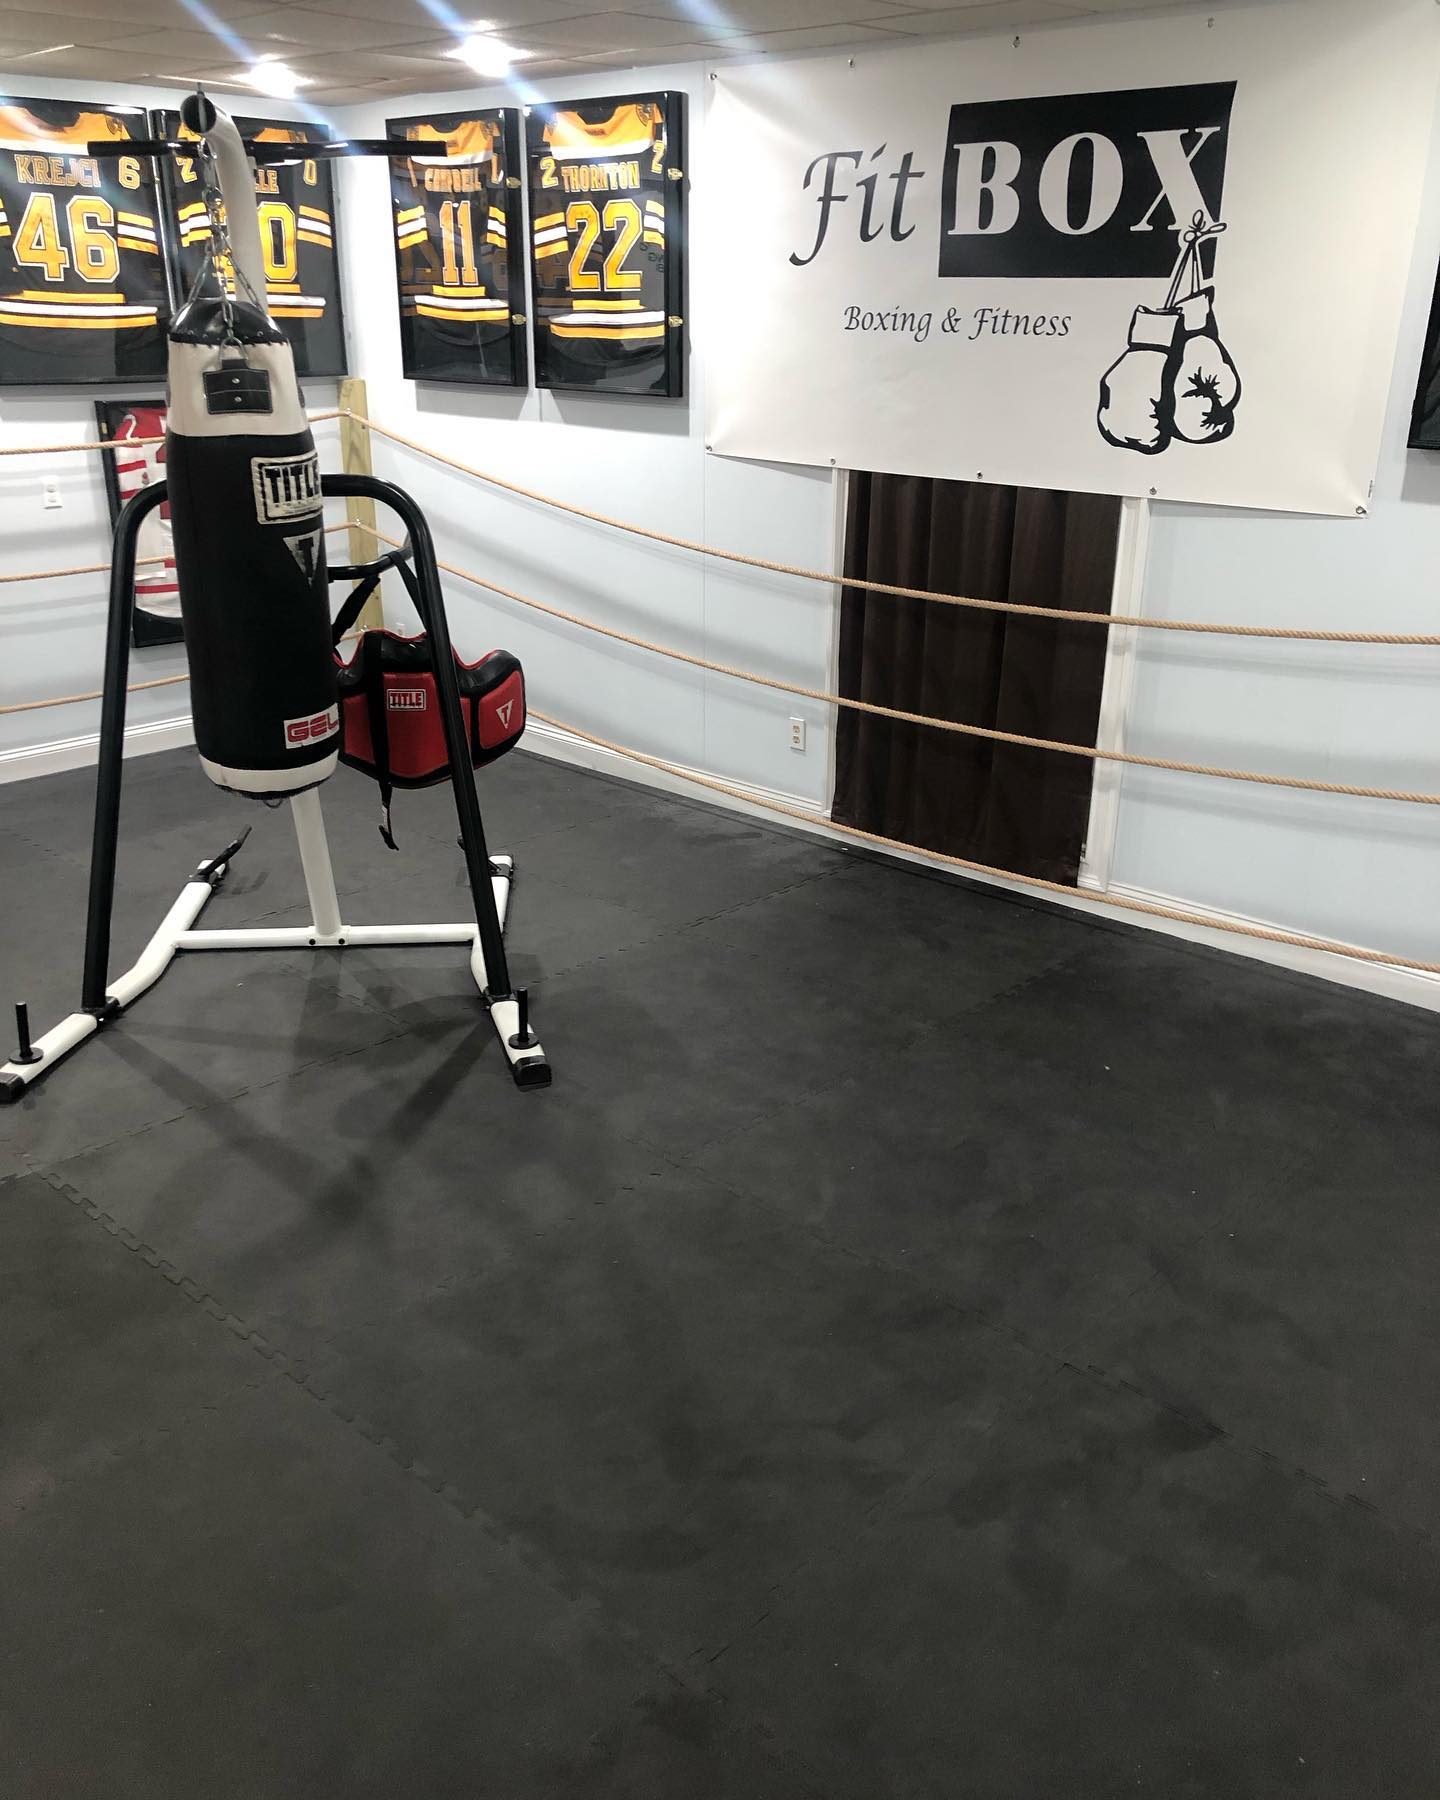 Looking to get back in shape but want to stay away from the crowded gyms . Contact us to learn more about our one-on-one Boxing workouts available in our private boxing studio located in Dedham,Ma. Call/text at (781)727-9503 or email FitBOX@outlook.com.
.